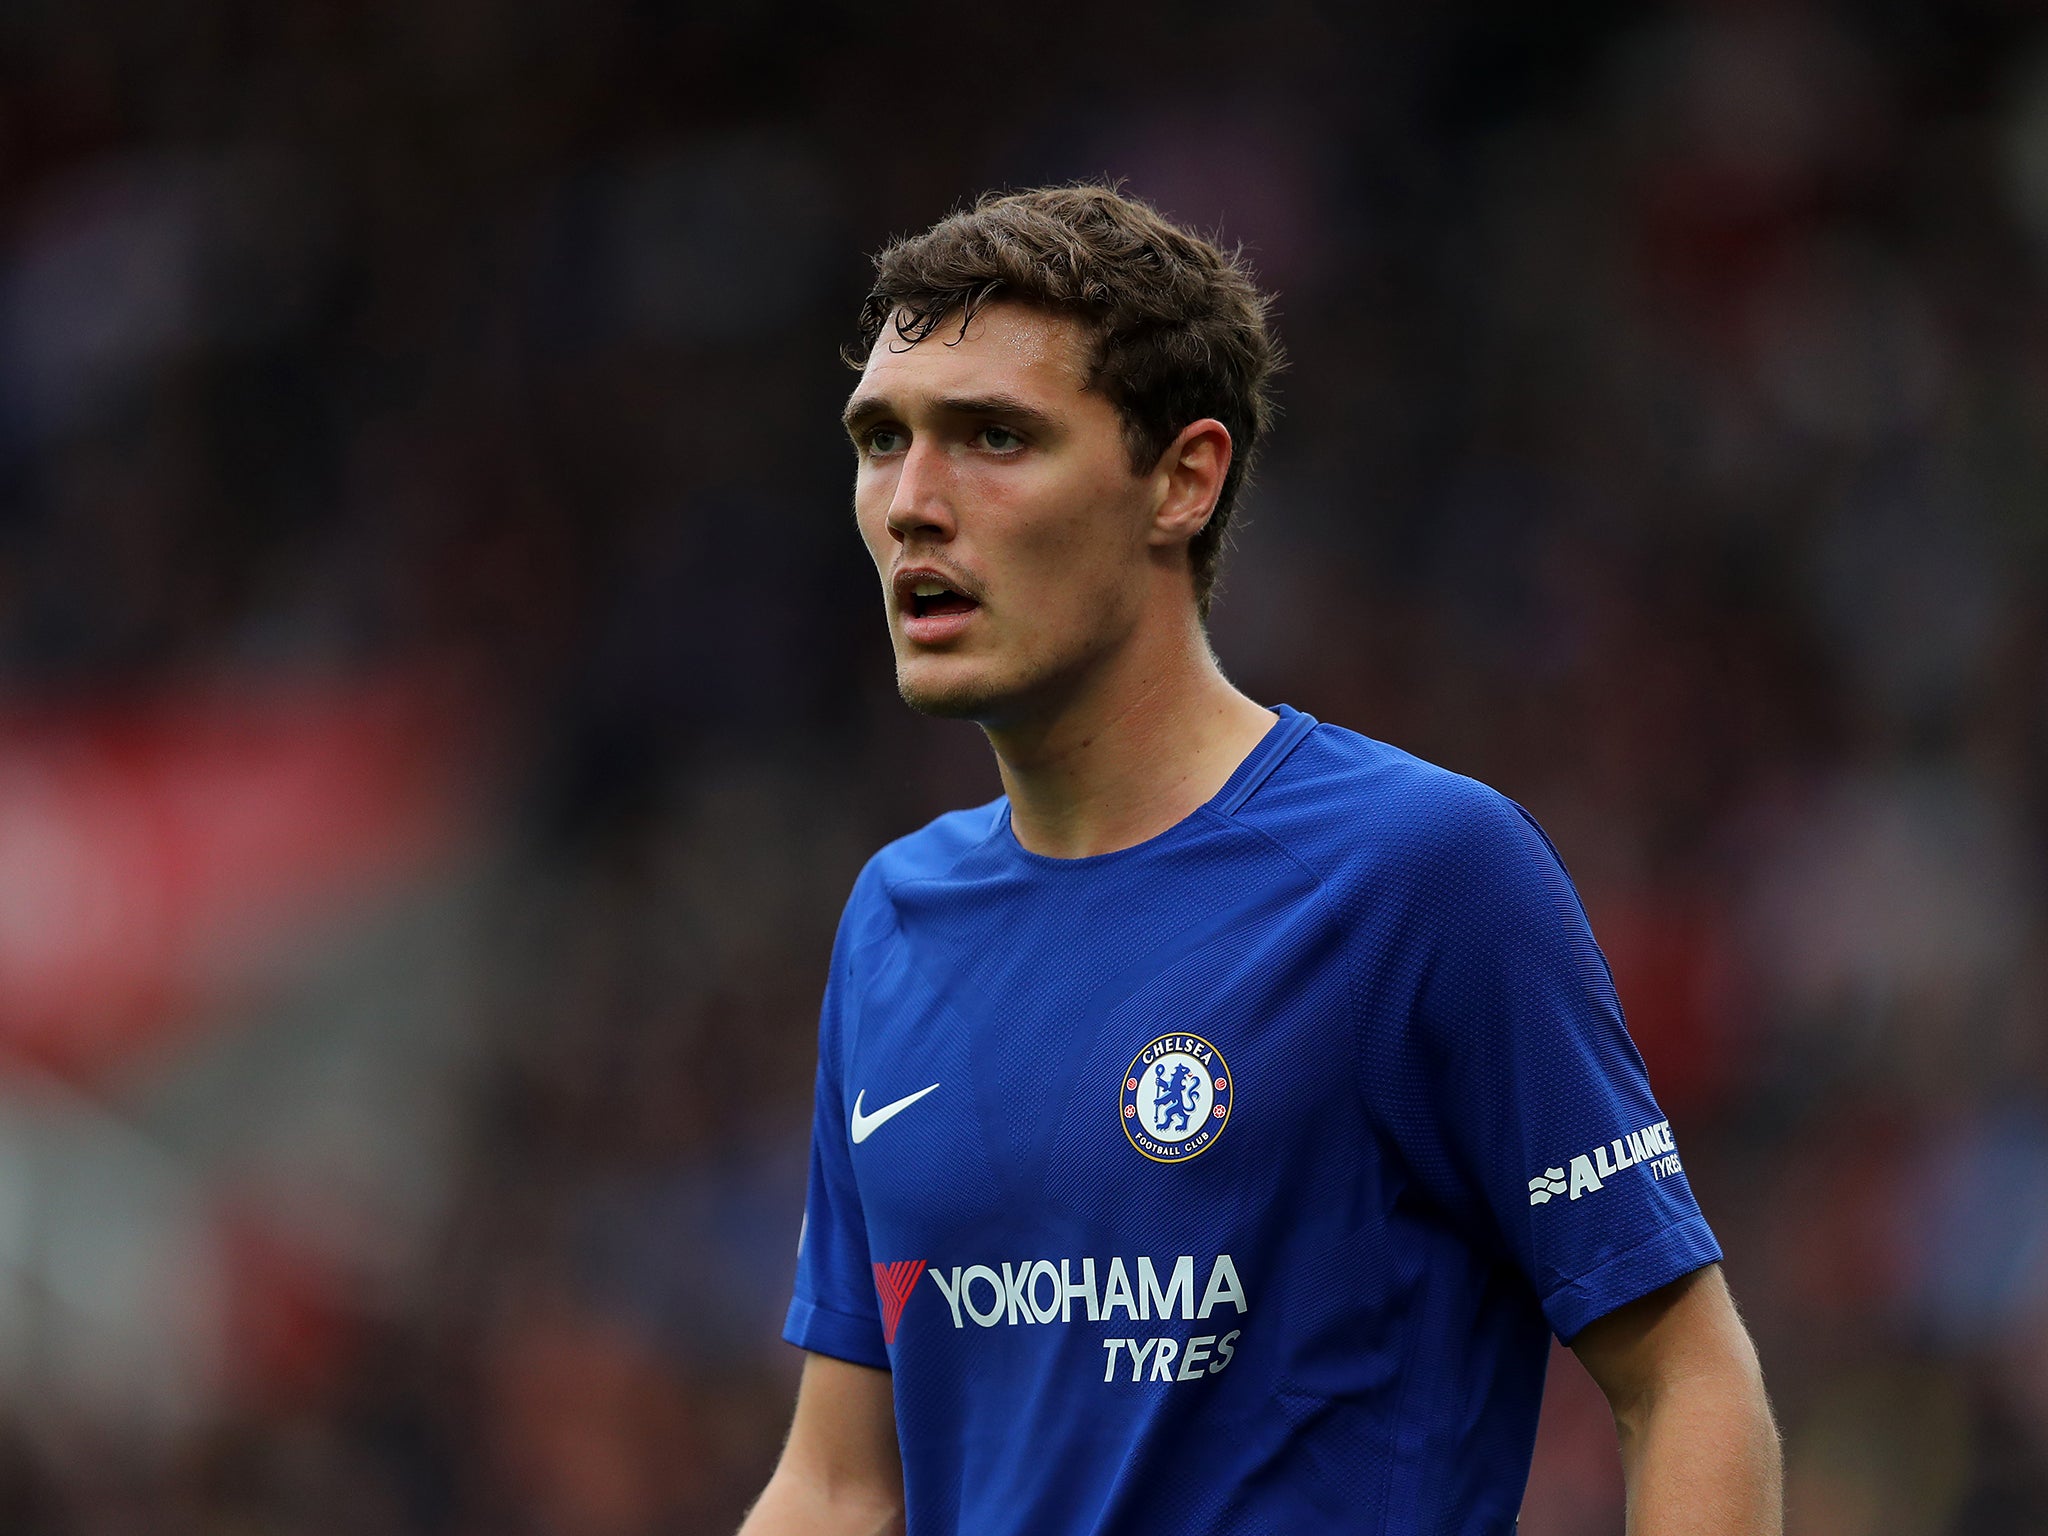 Andreas Christensen has emerged as a defensive stalwart for Chelsea